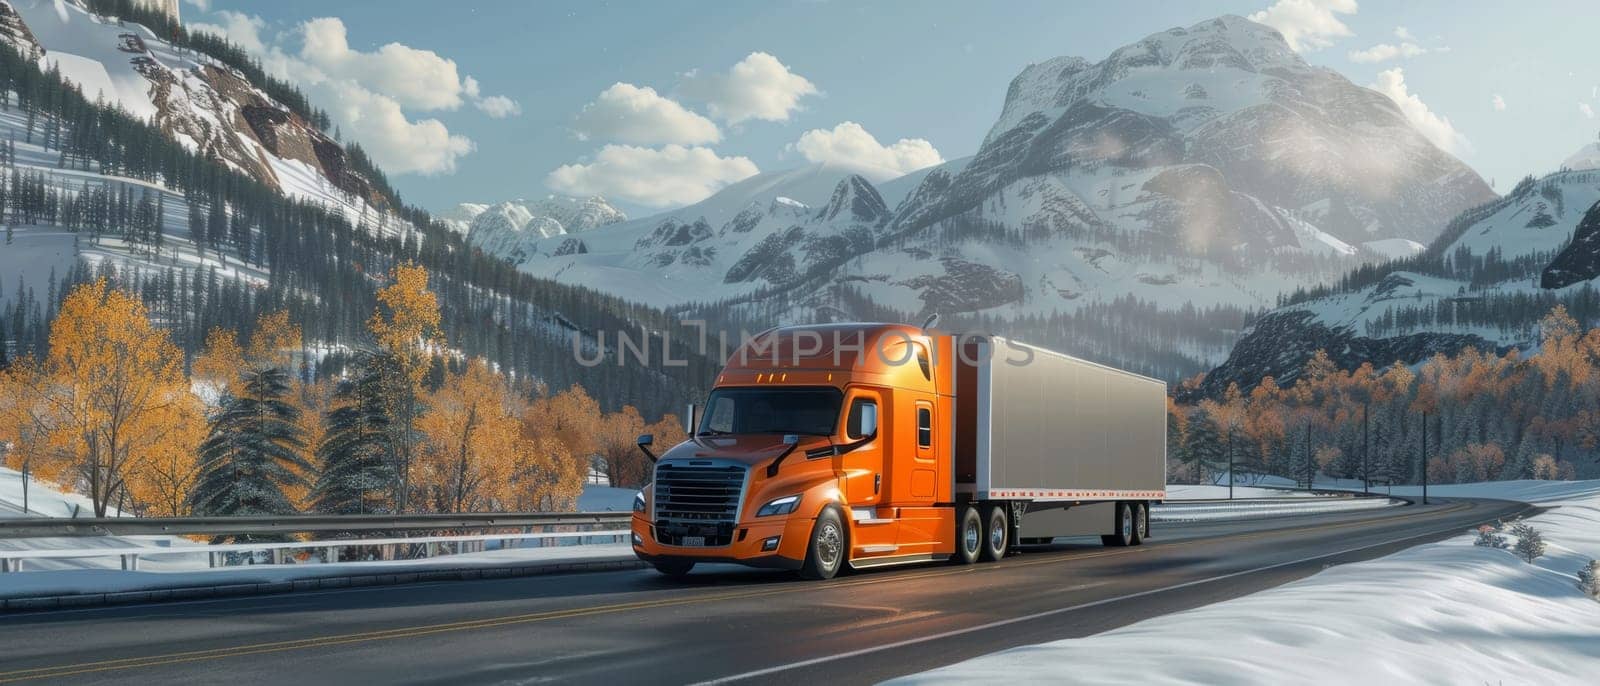 An orange semi truck drives along a snow-lined mountain road with golden aspen trees against snowy peaks